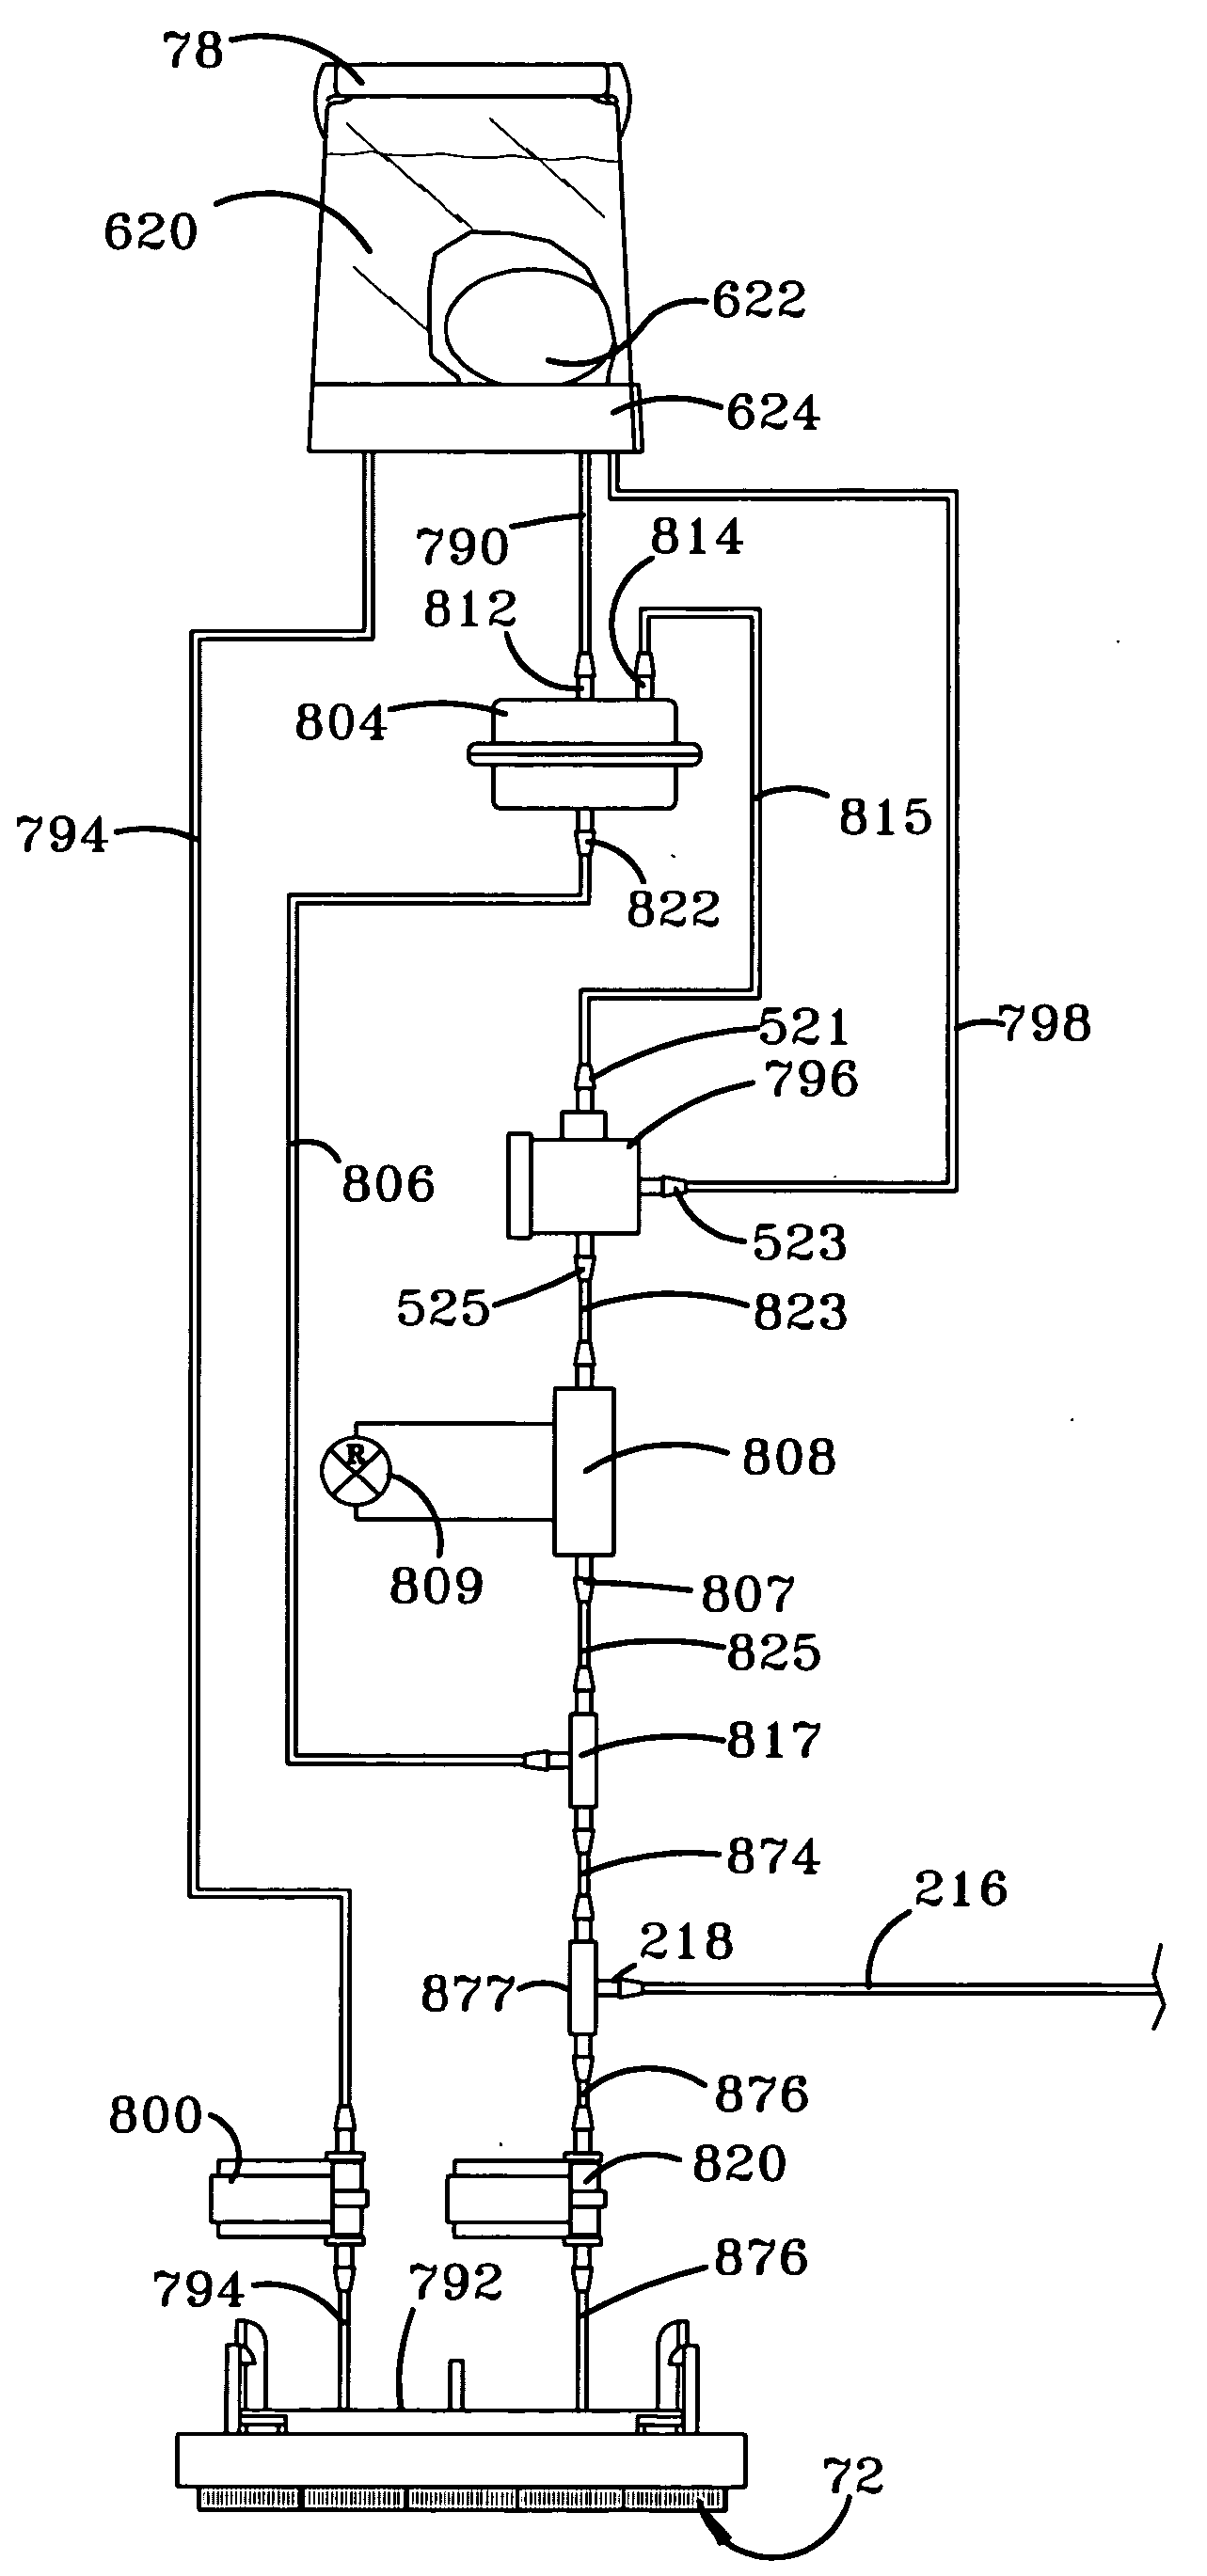 Solution distribution arrangement for a cleaning machine